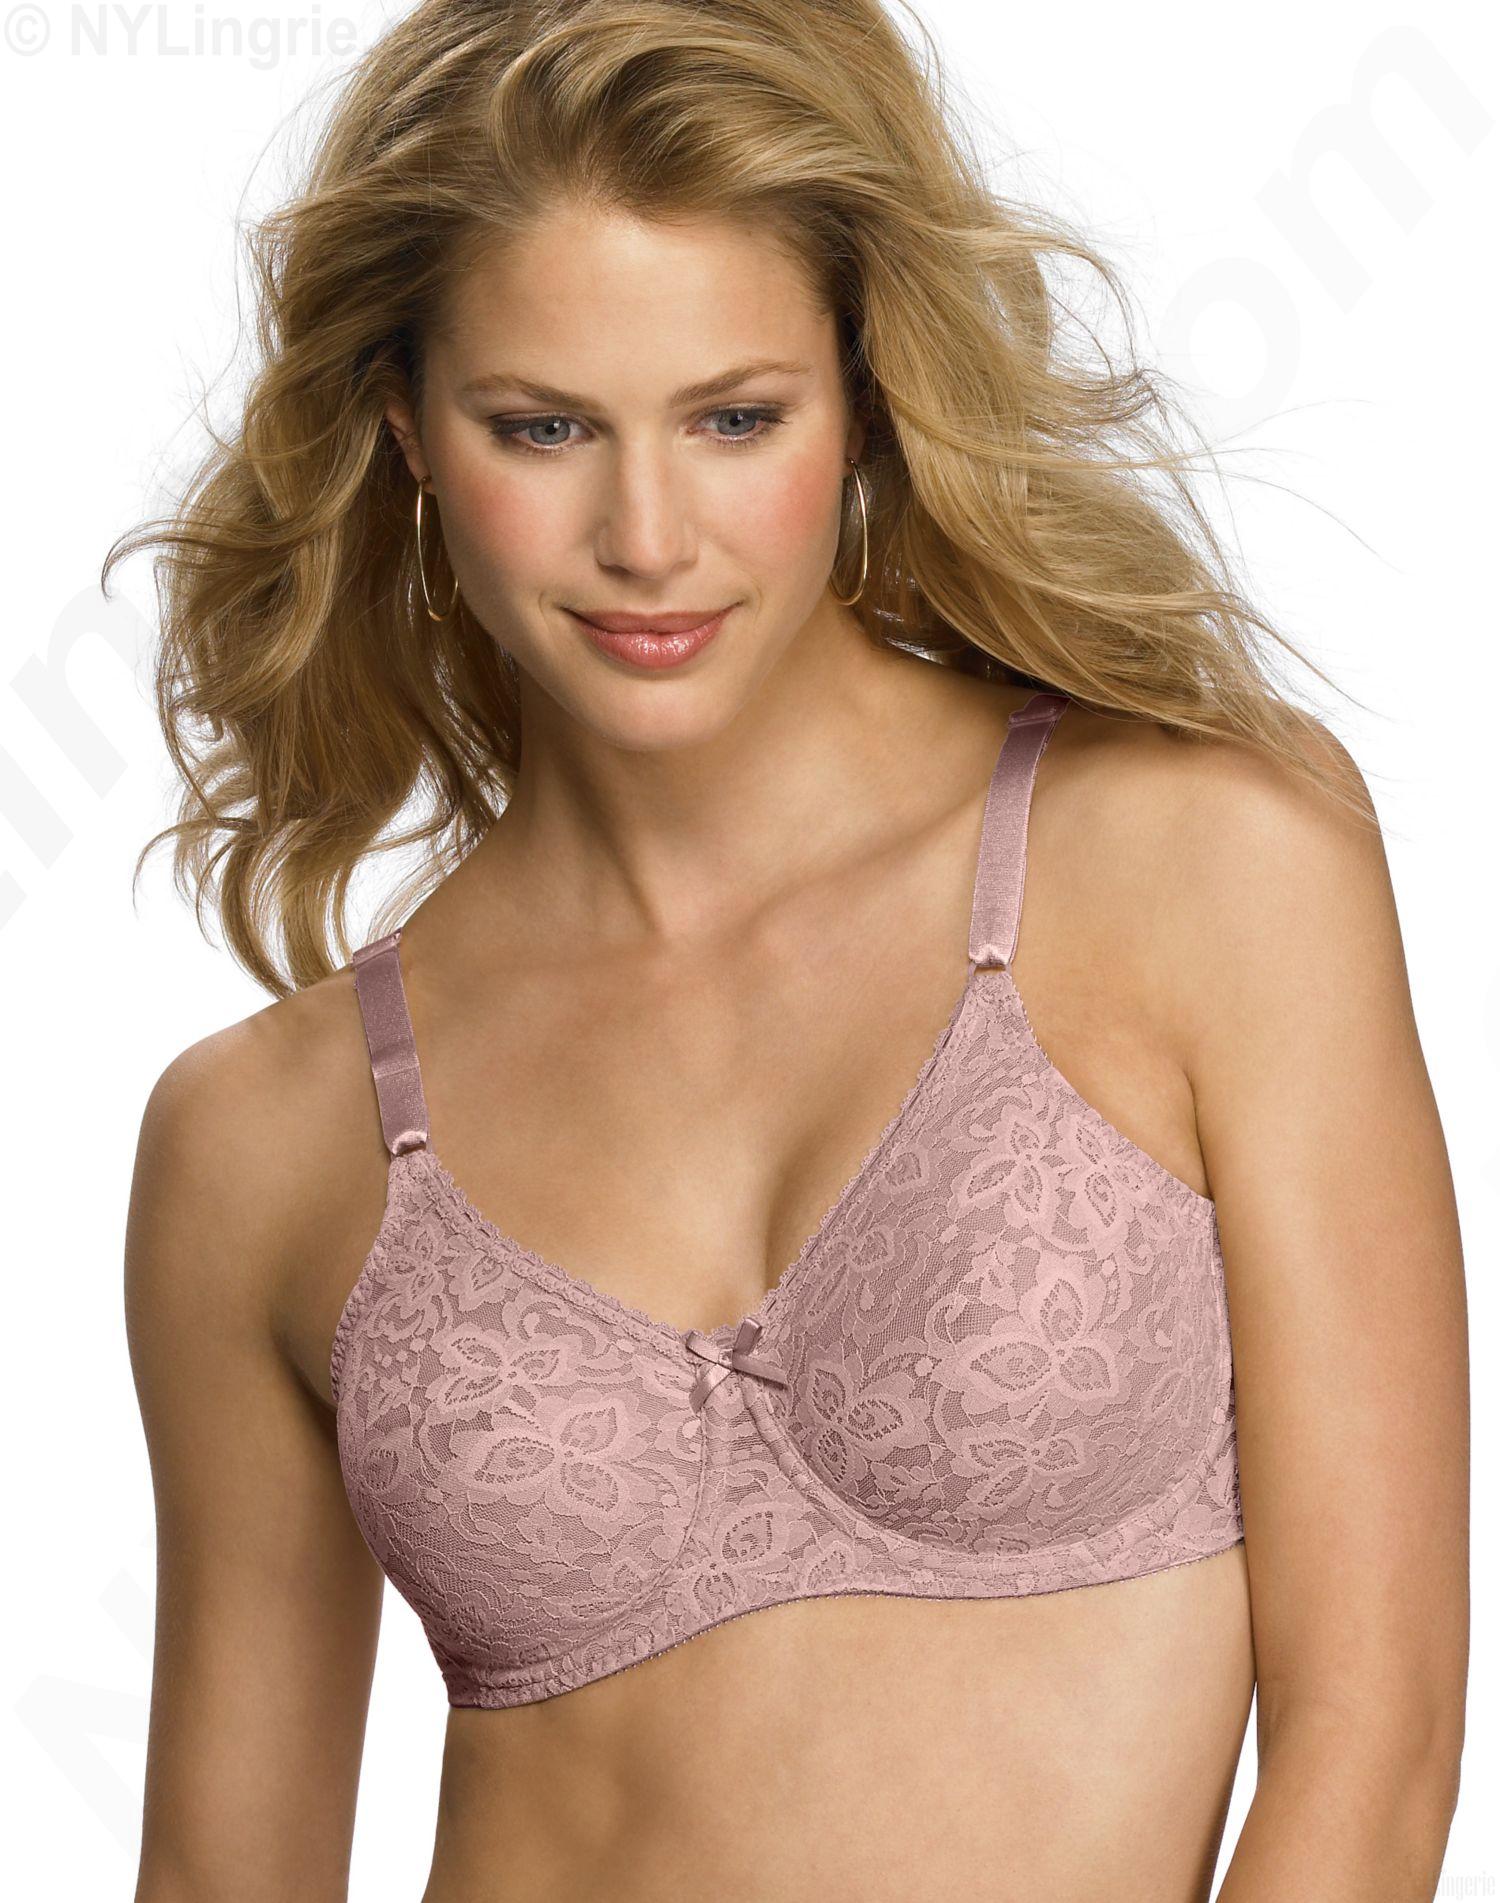 Bali Lace 'N Smooth® Underwire Full Coverage Bra 3432